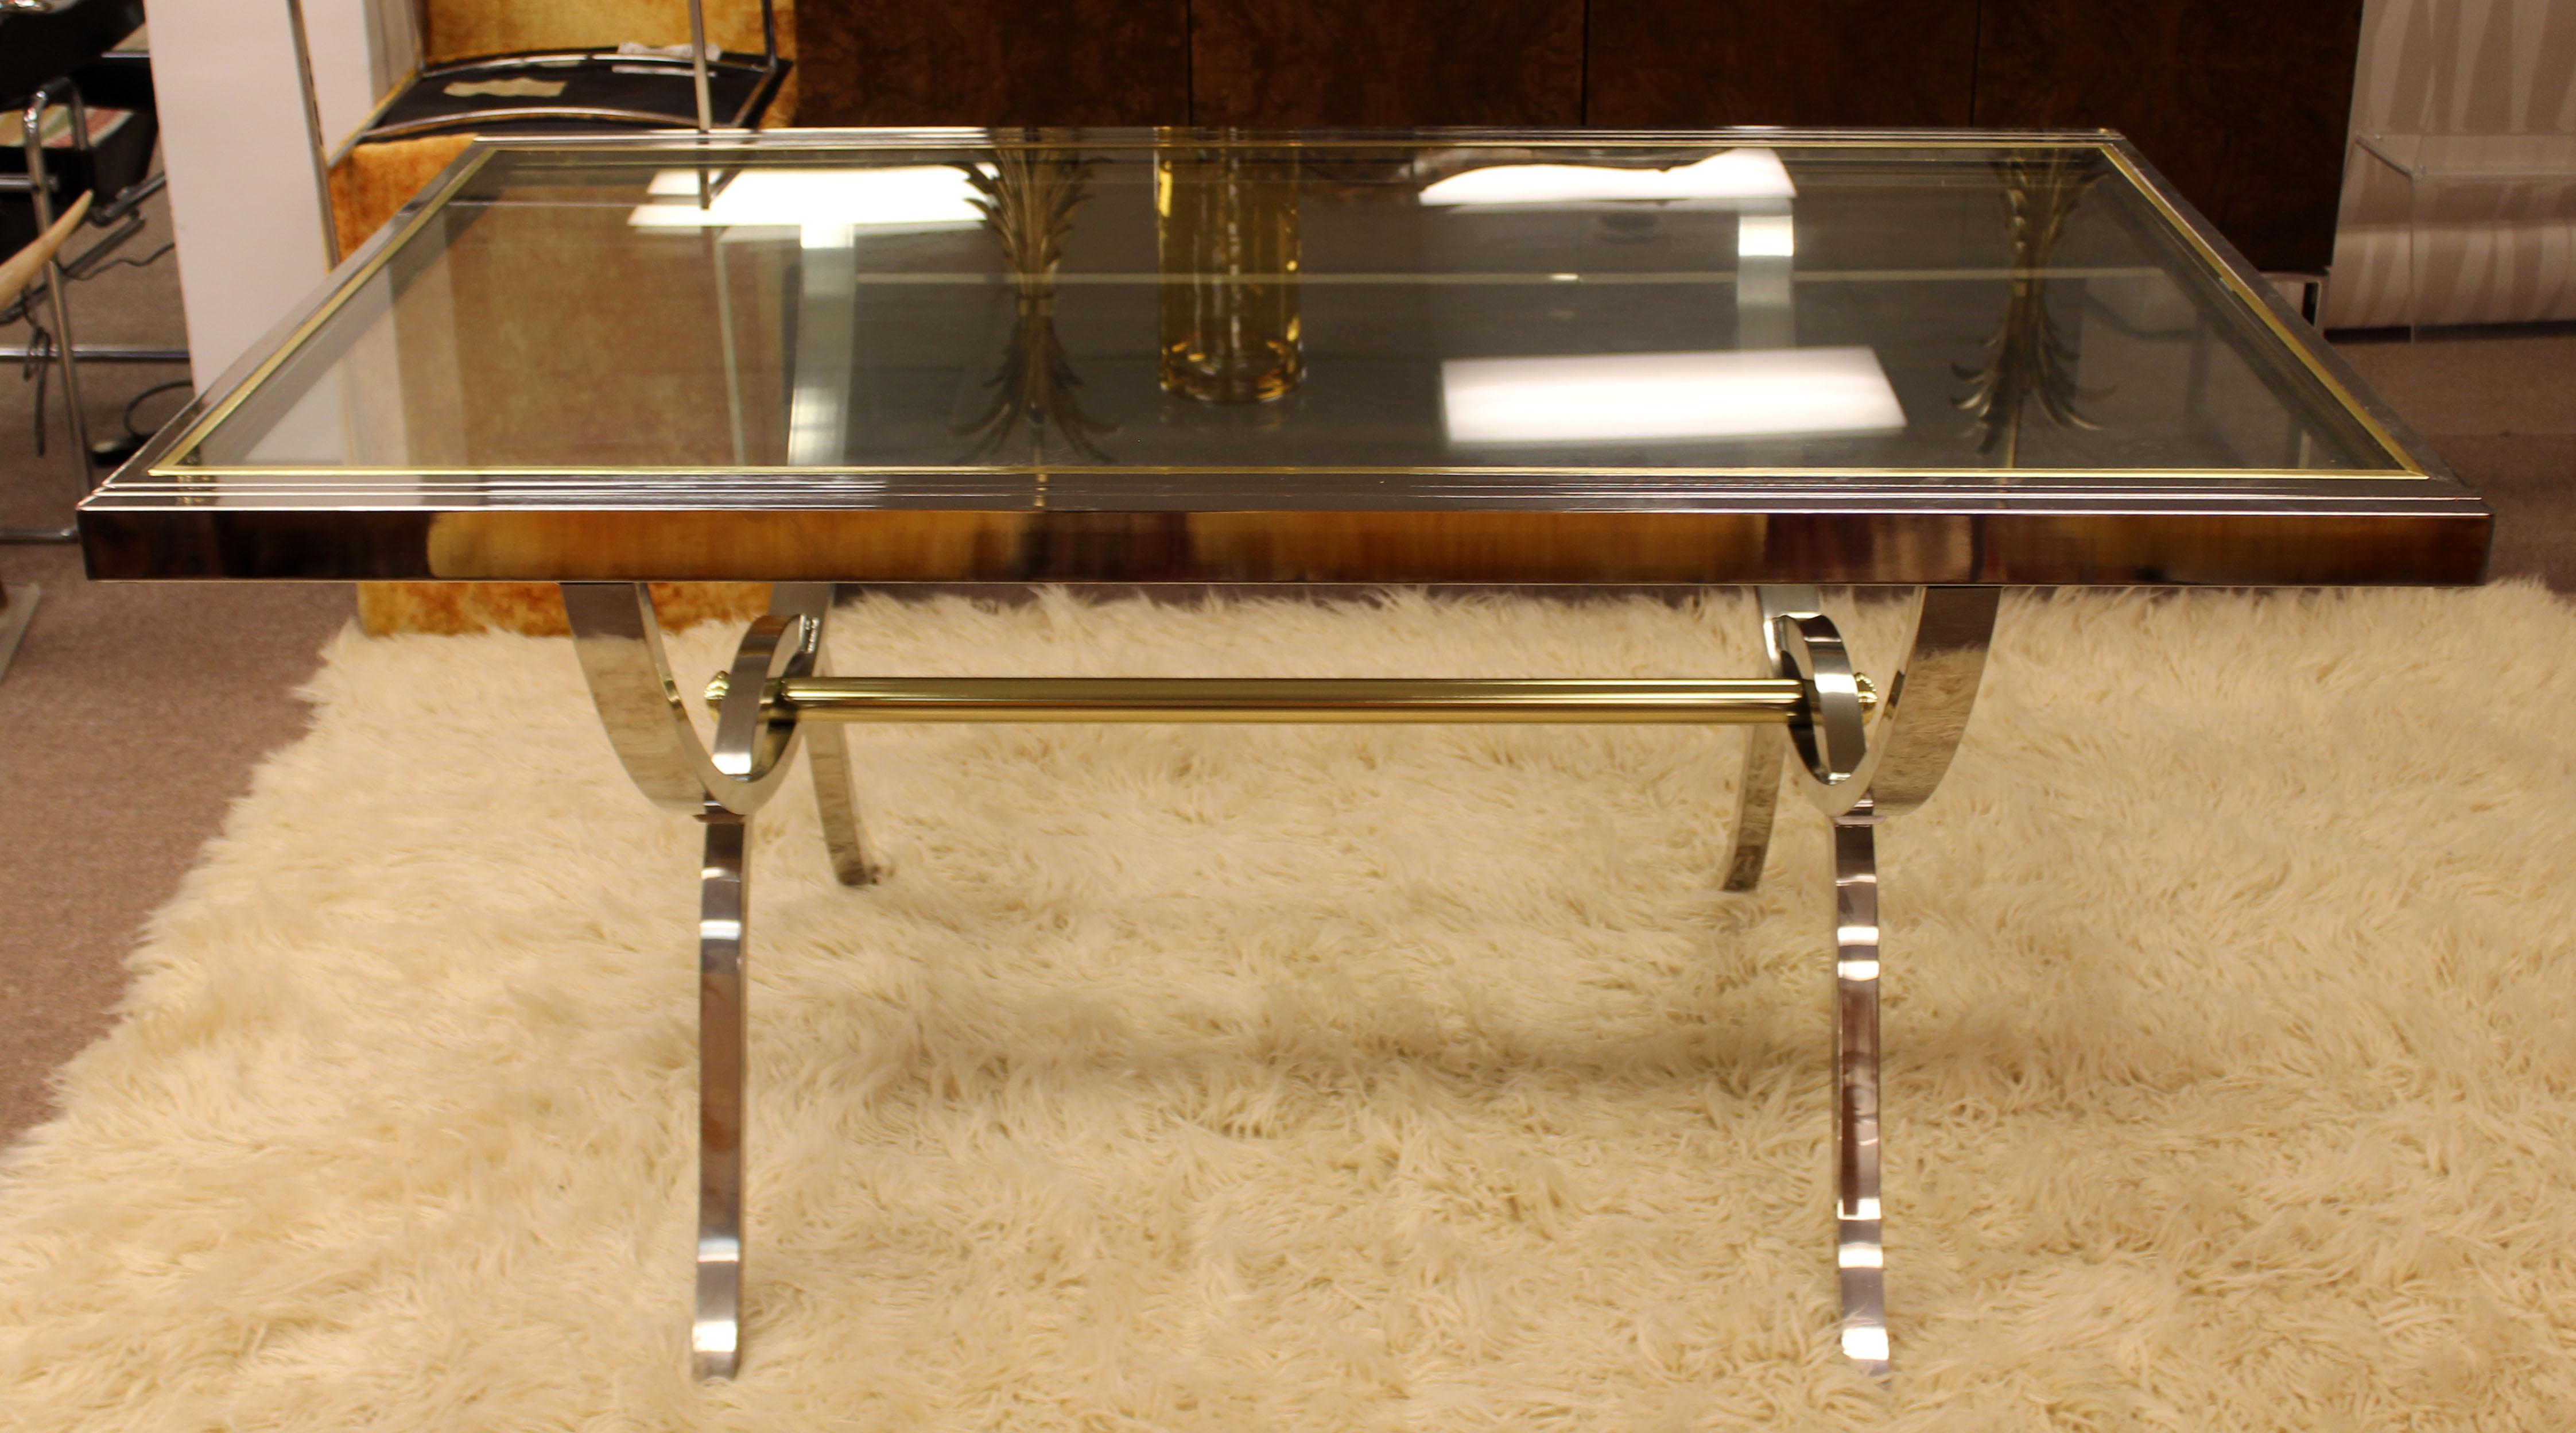 For your consideration is an incredibly luxe and rare extendable dining table, made of chrome and brass and with a glass top, by Milo Baughman for DIA, circa the 1970s. In excellent condition. The dimensions are 60